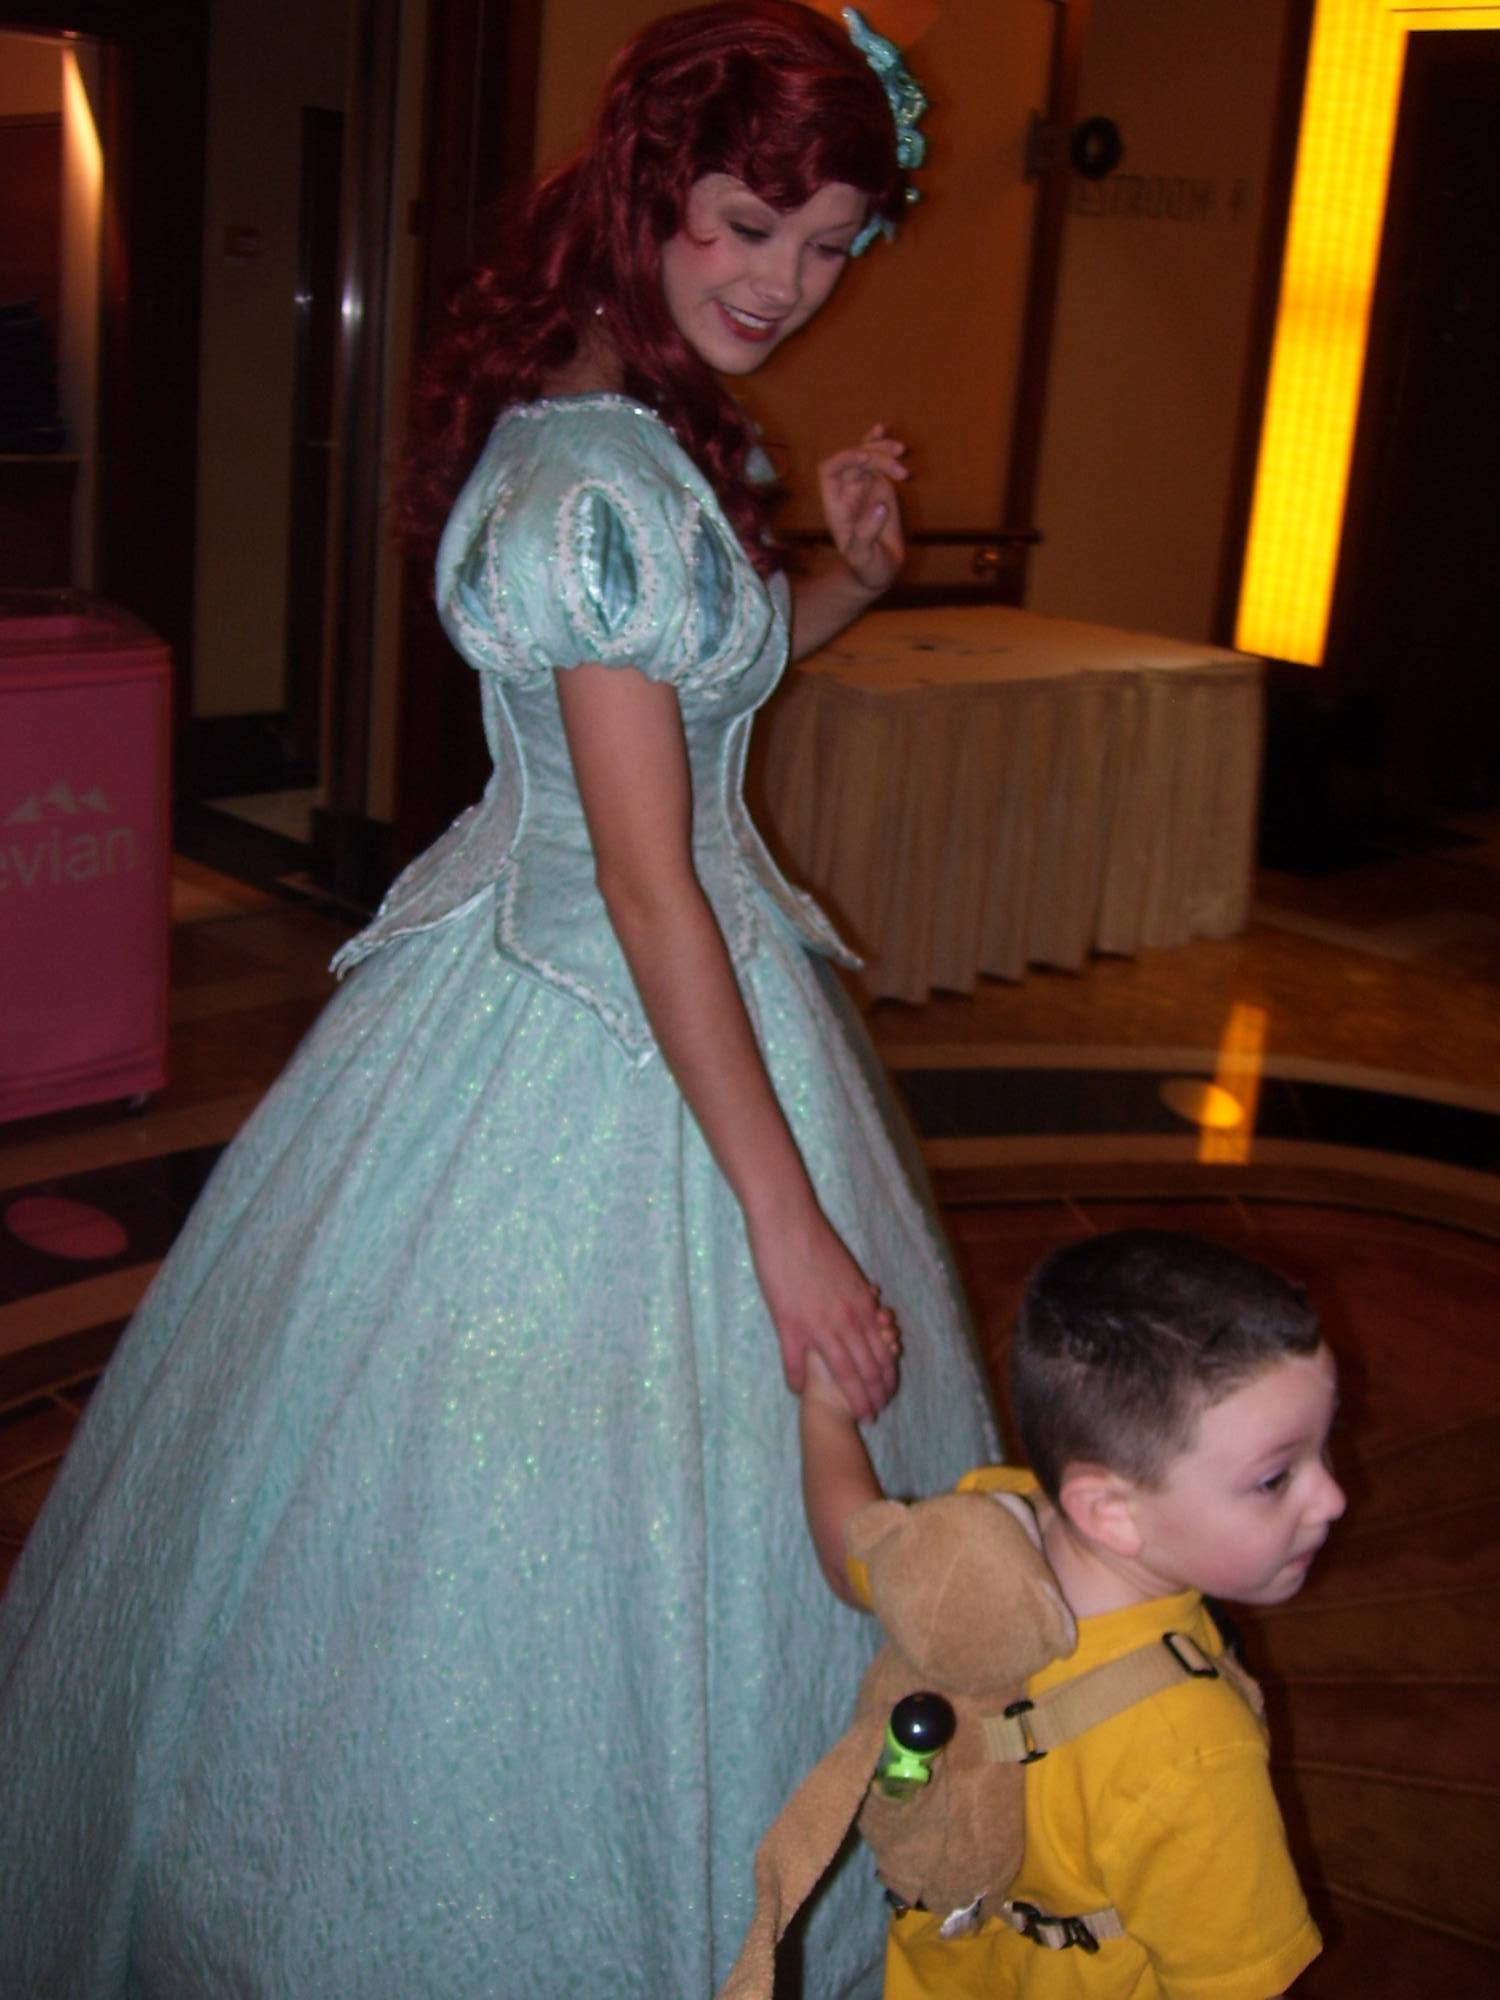 B's first meeting with Ariel